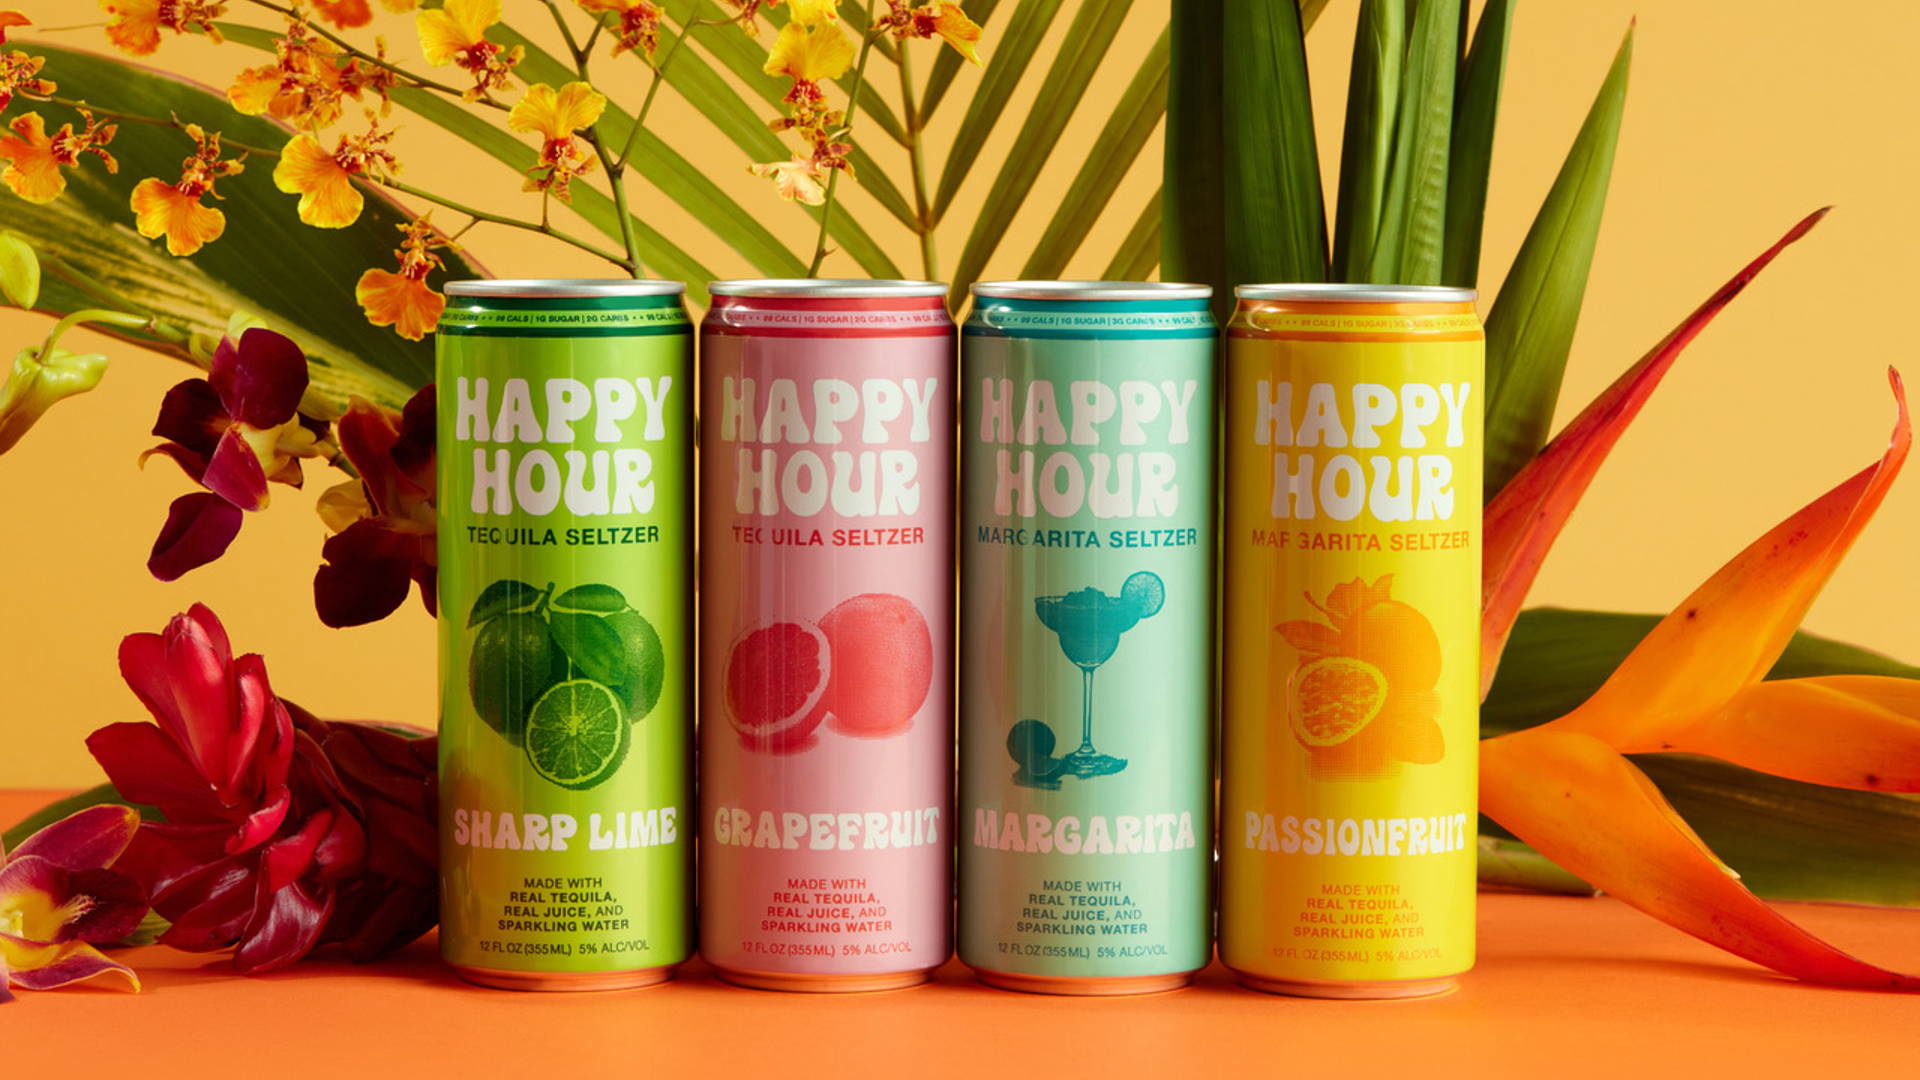 Featured image for Happy Hour's Tequila Seltzers Make For A Colorful Companion